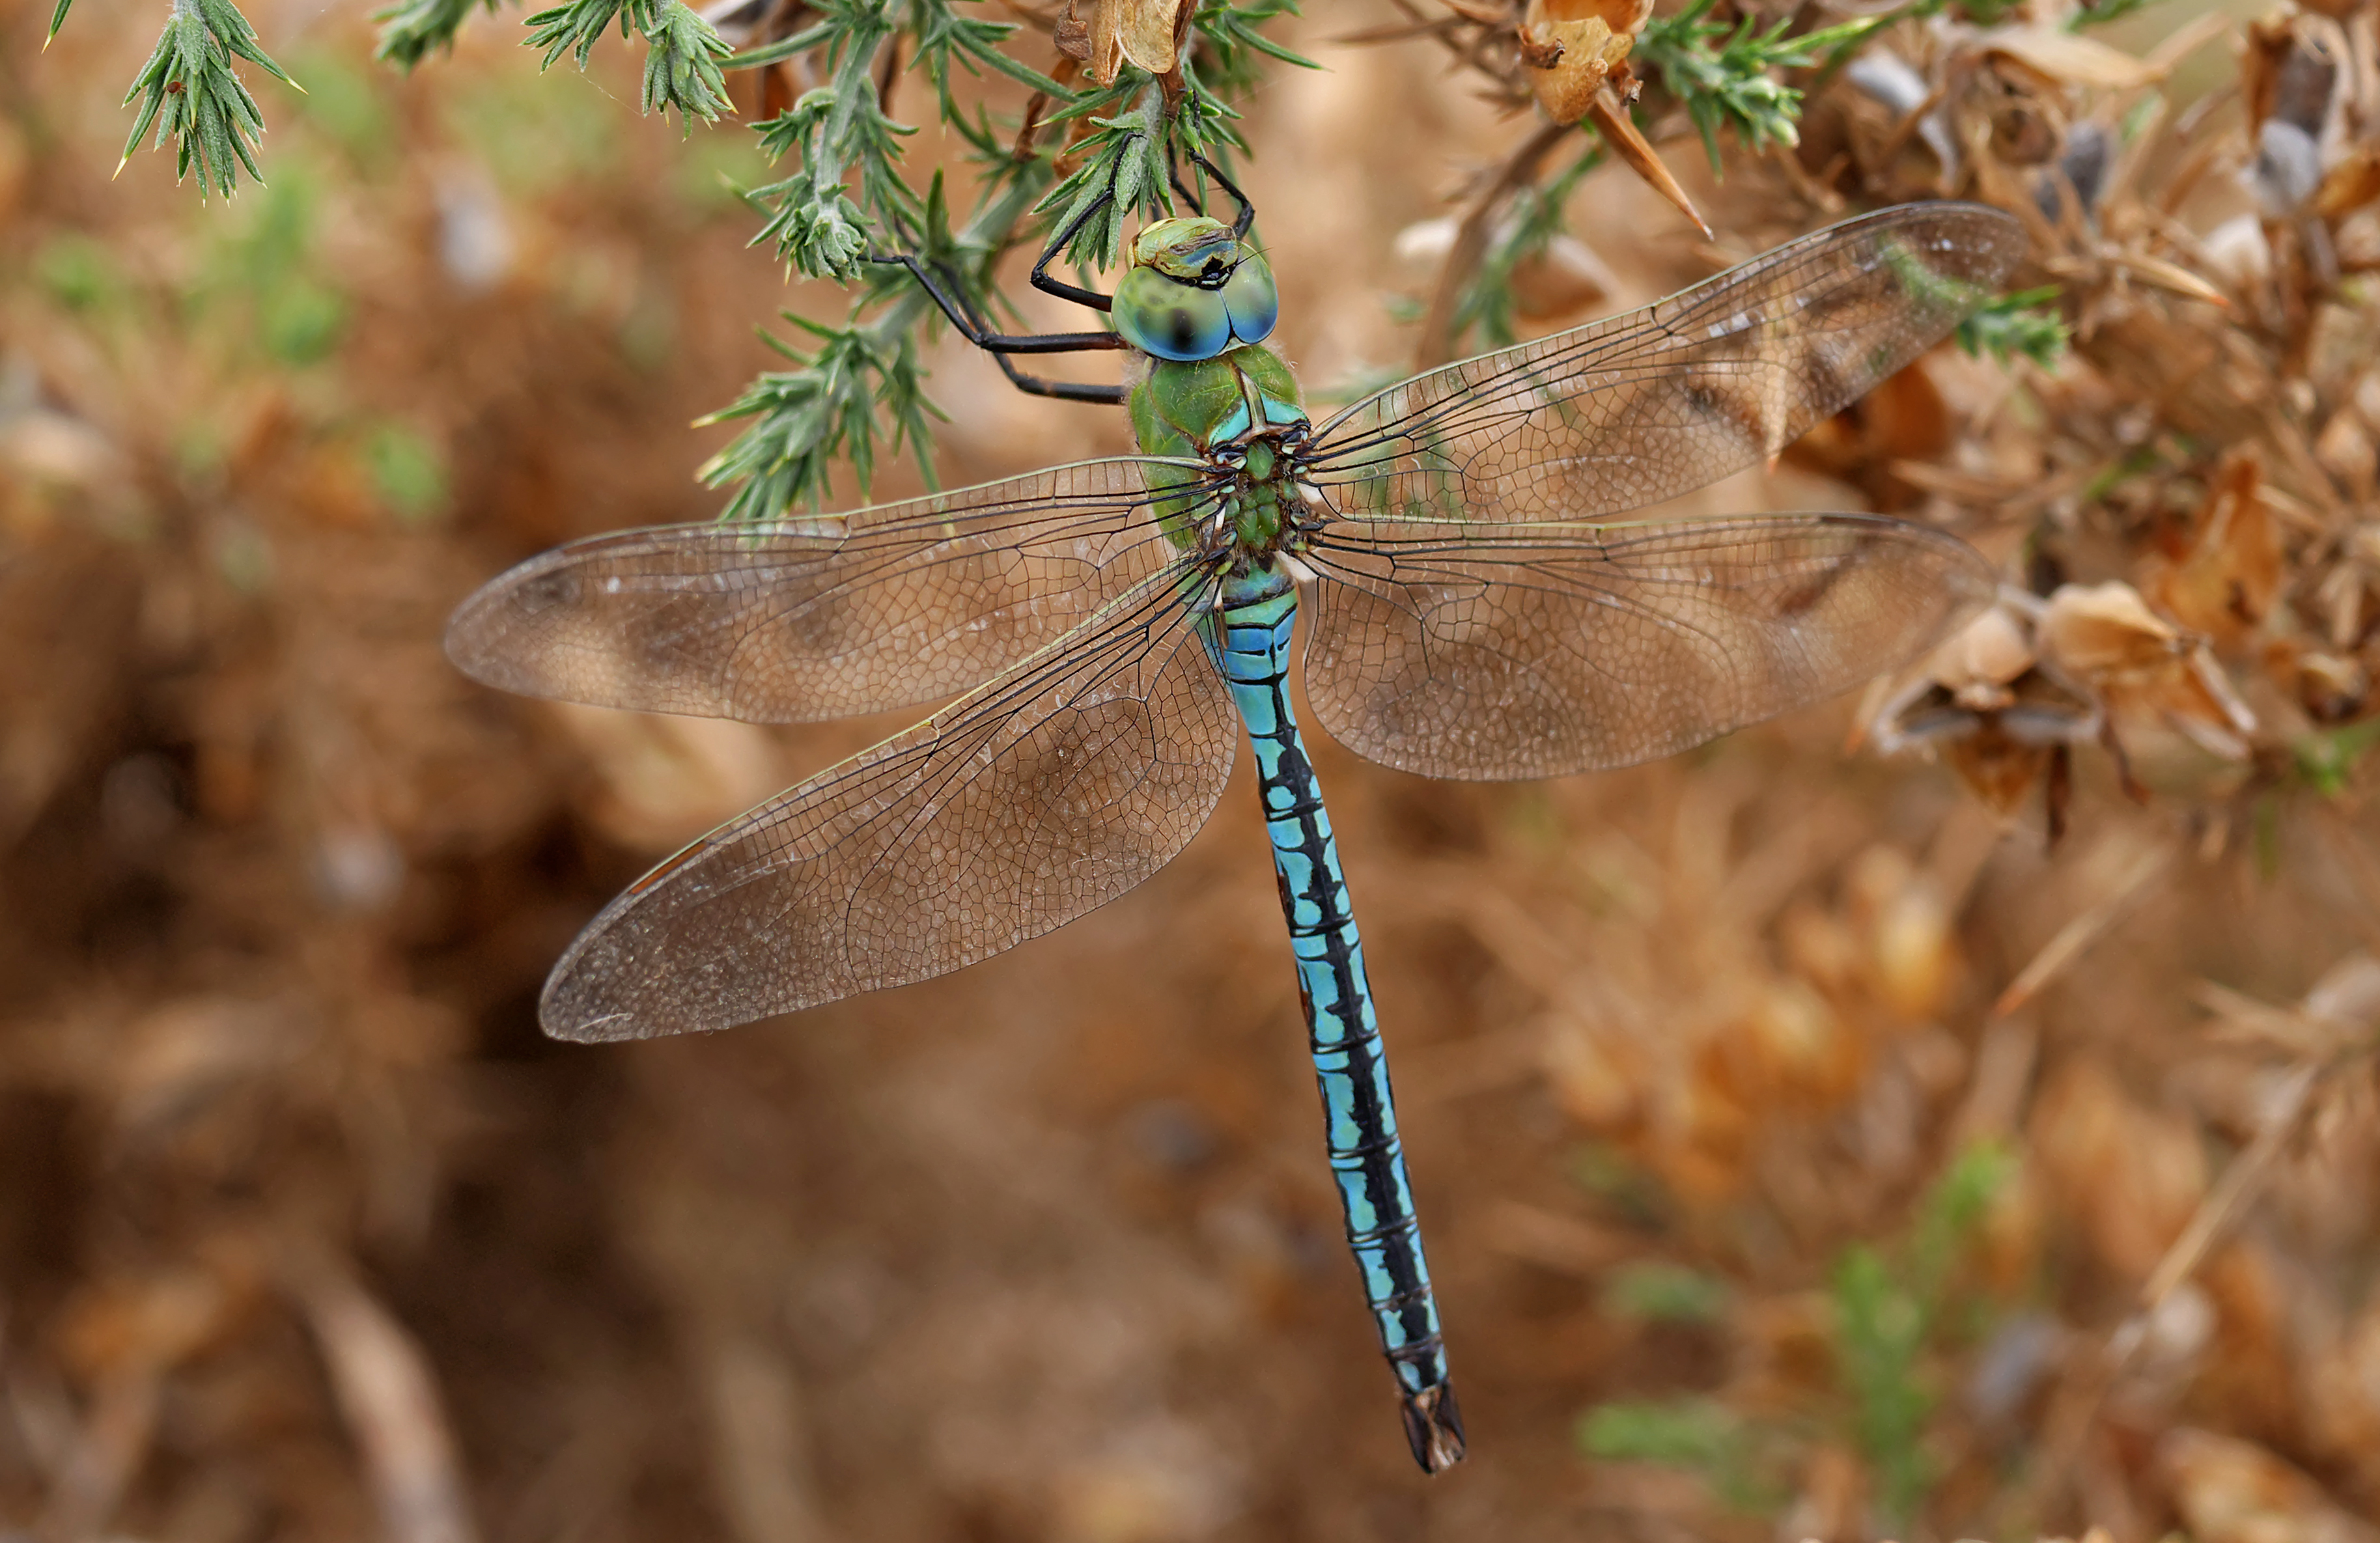 Emperor dragonfly (Anax imperator), Le Courégant, Brittany, France (19651212169)